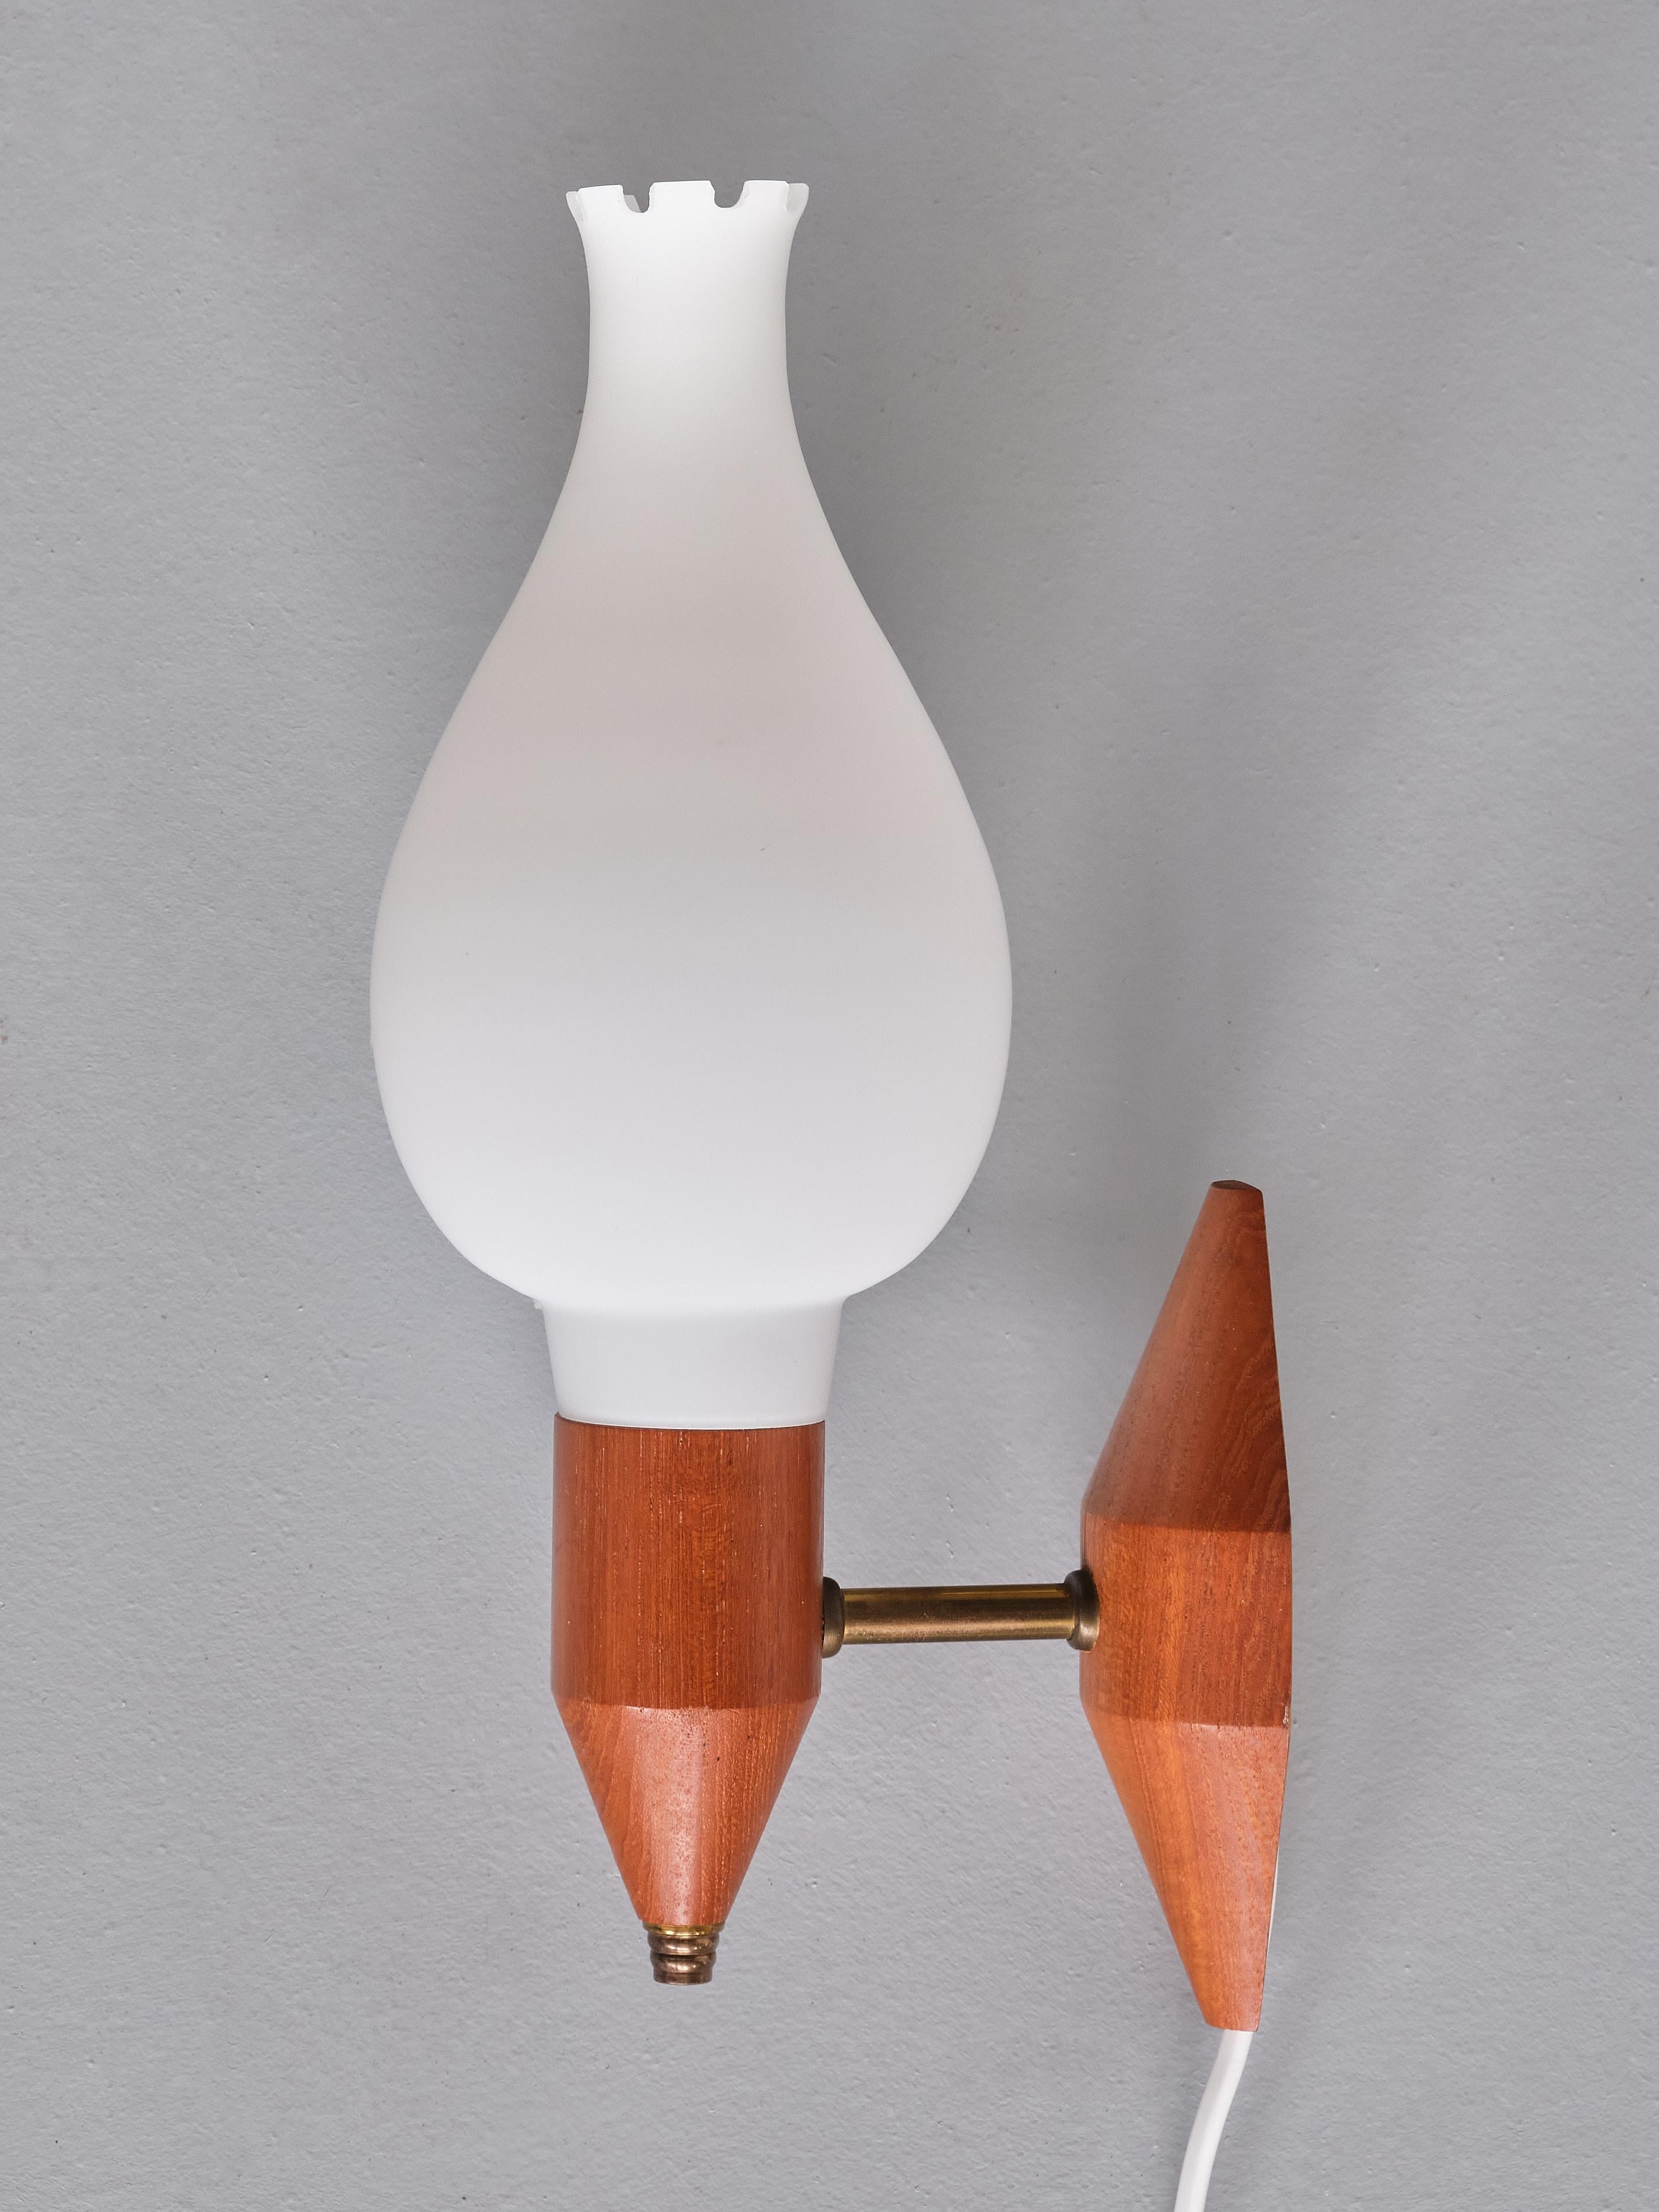 This elegant pair of wall lights was produced in Sweden in the 1950s. The design consists of a holder and back plate in solid teak wood, with a beautiful, warm grain. A nice detail is the arm and finial in brass. The matt white shades are tear